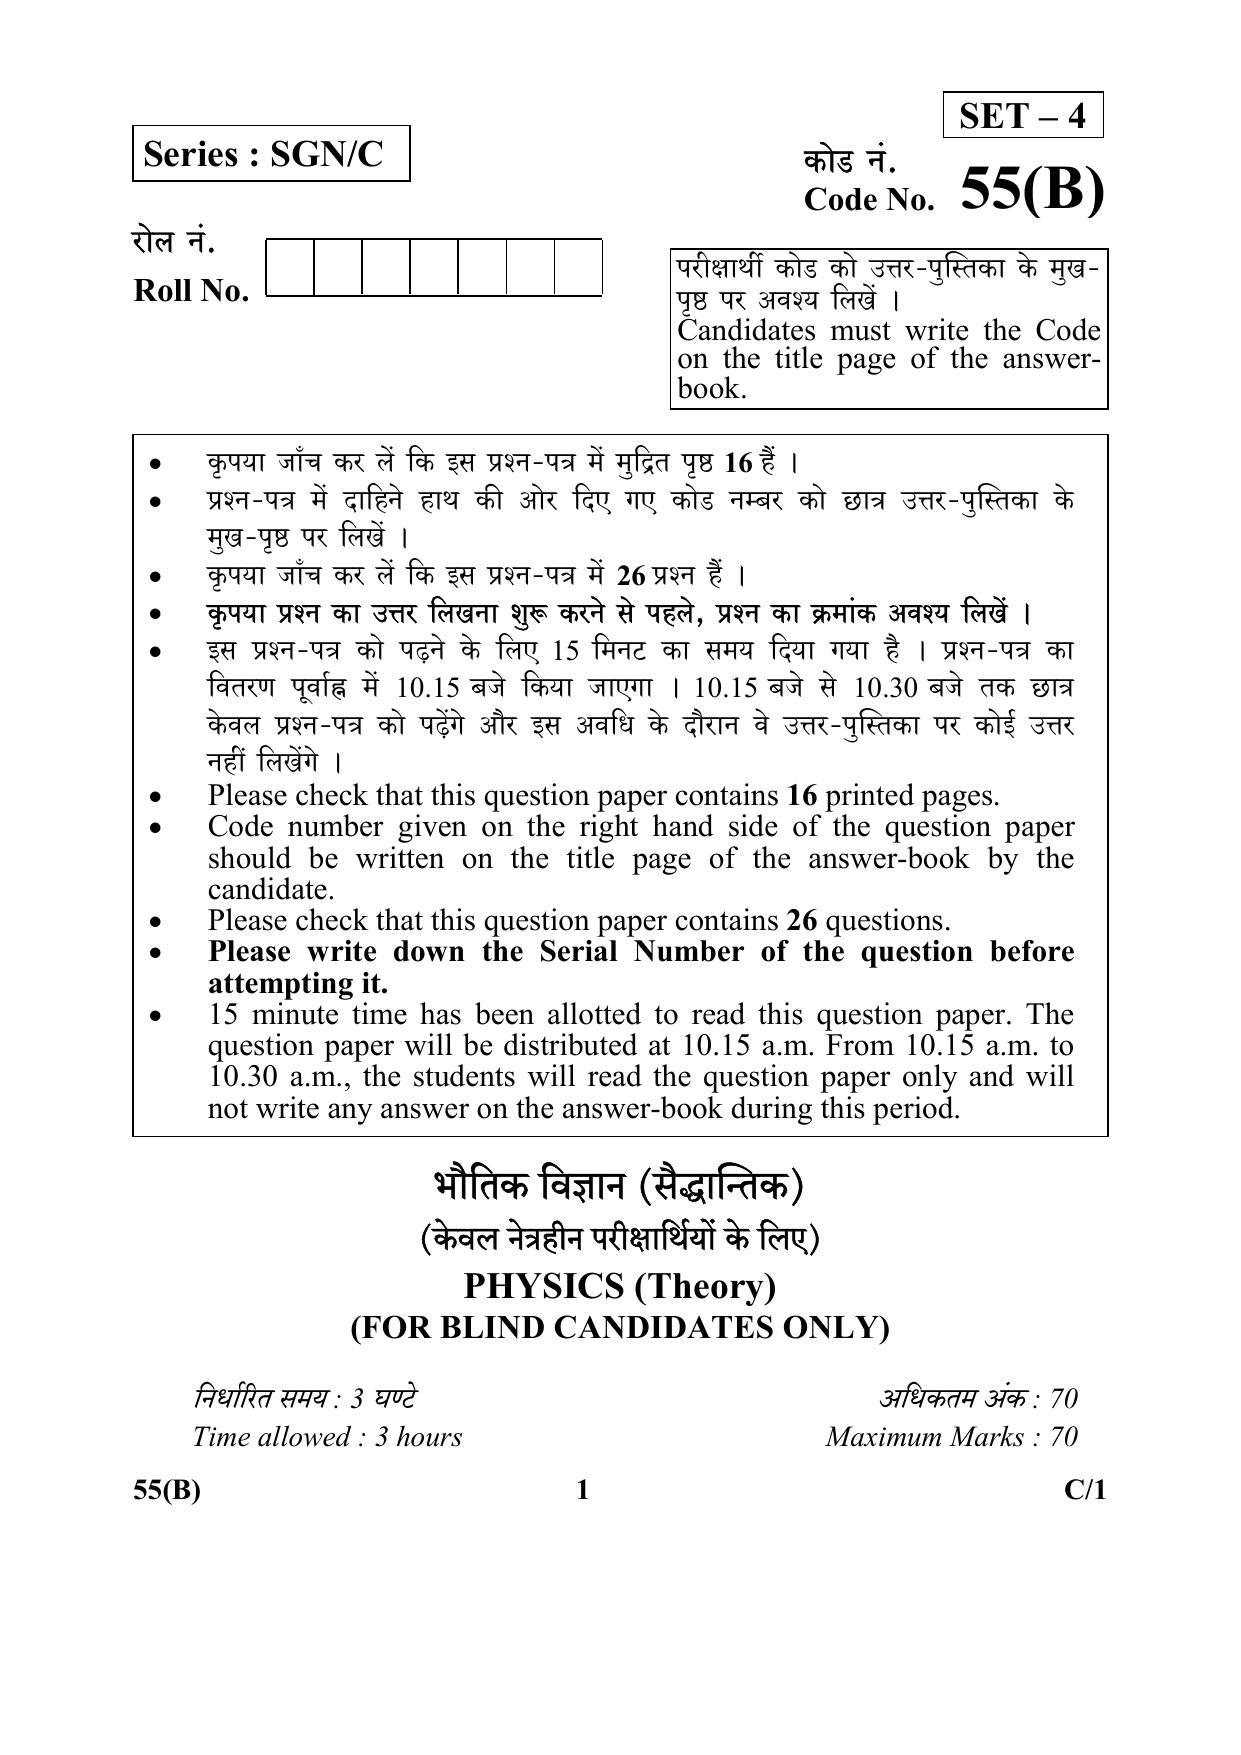 CBSE Class 12 55(B) (Physics) 2018 Compartment Question Paper - Page 1